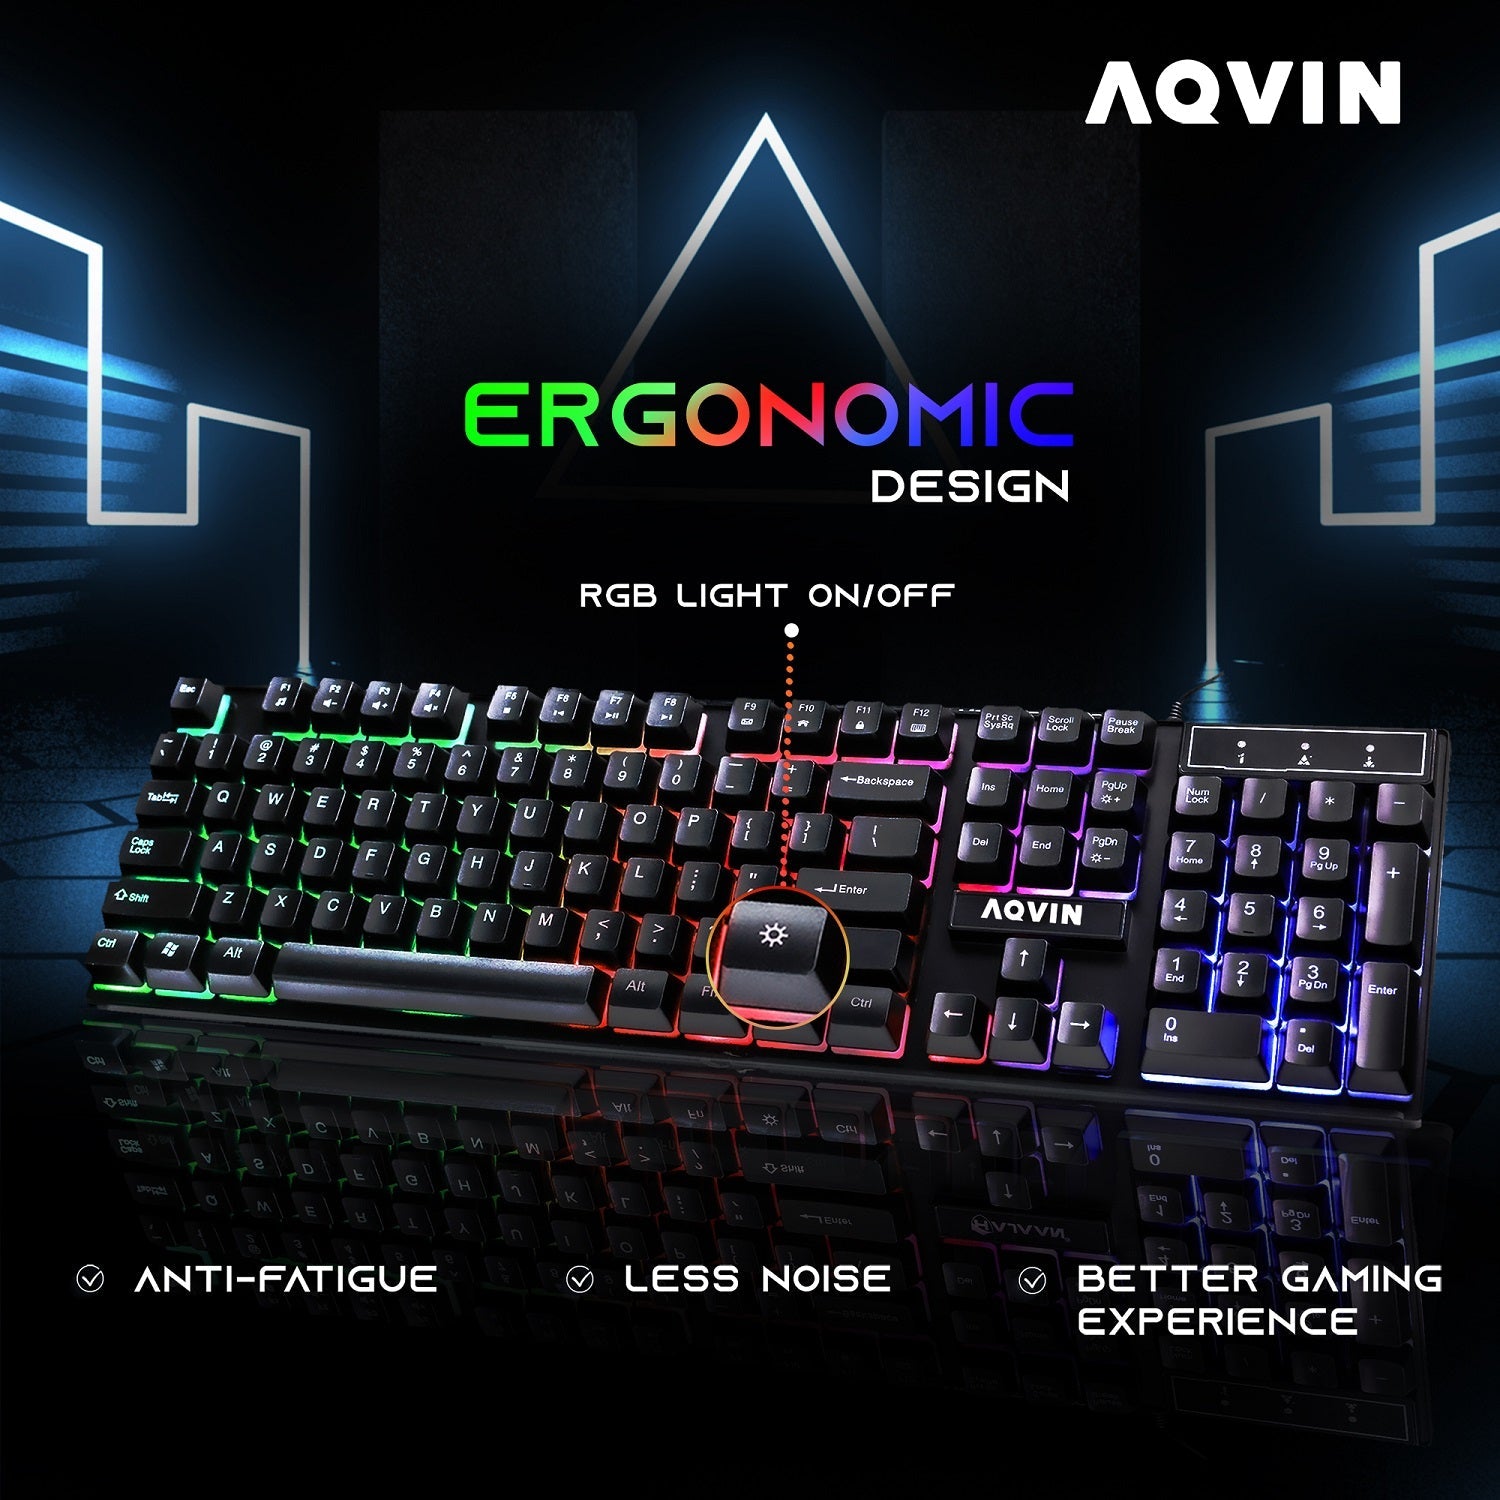 AQVIN Gaming PC Tower Desktop Computer Combo, Intel Core i7 up to 4.00 GHz, 32GB DDR4 RAM, 1TB - 2TB SSD, RX 580, GTX 1660s, RTX 3050, RTX 3060, Windows 10 Pro, WIFI - 27 inch Curved Gaming Monitor